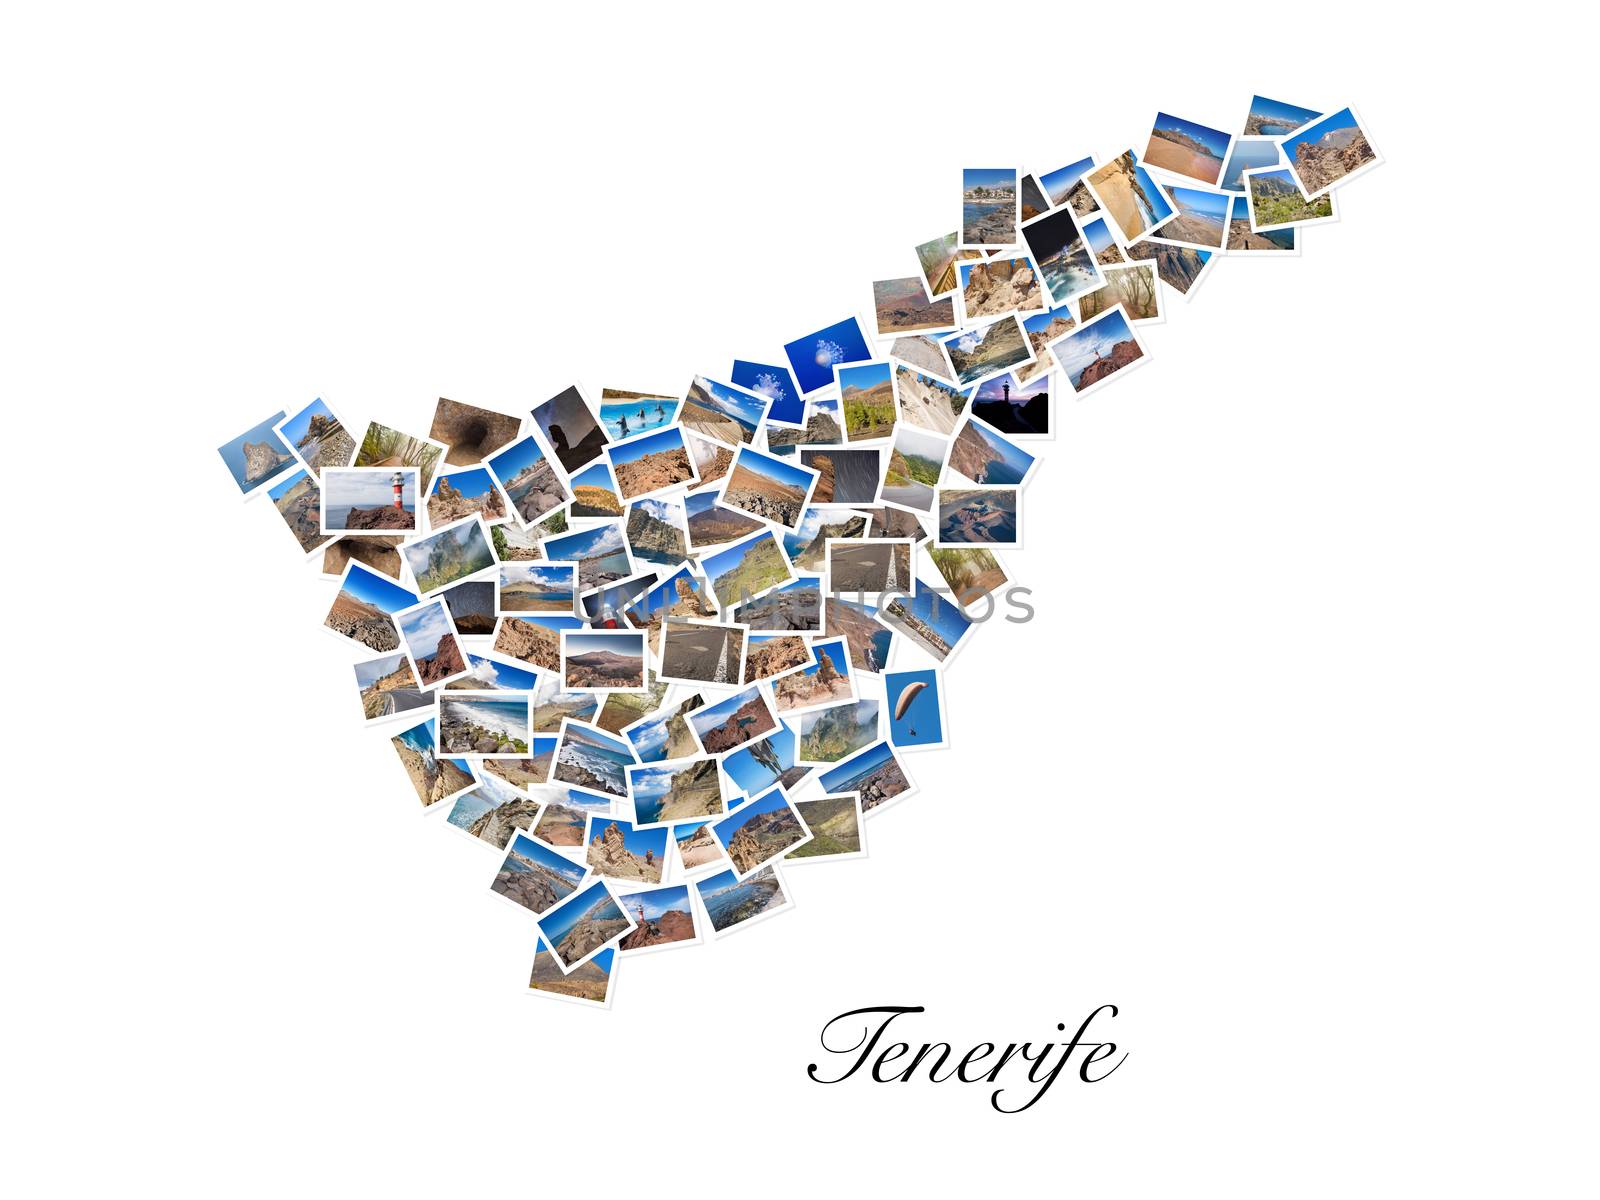 A collage of my best travel photos of Tenerife, forming the shape of Tenerife island, version 3.